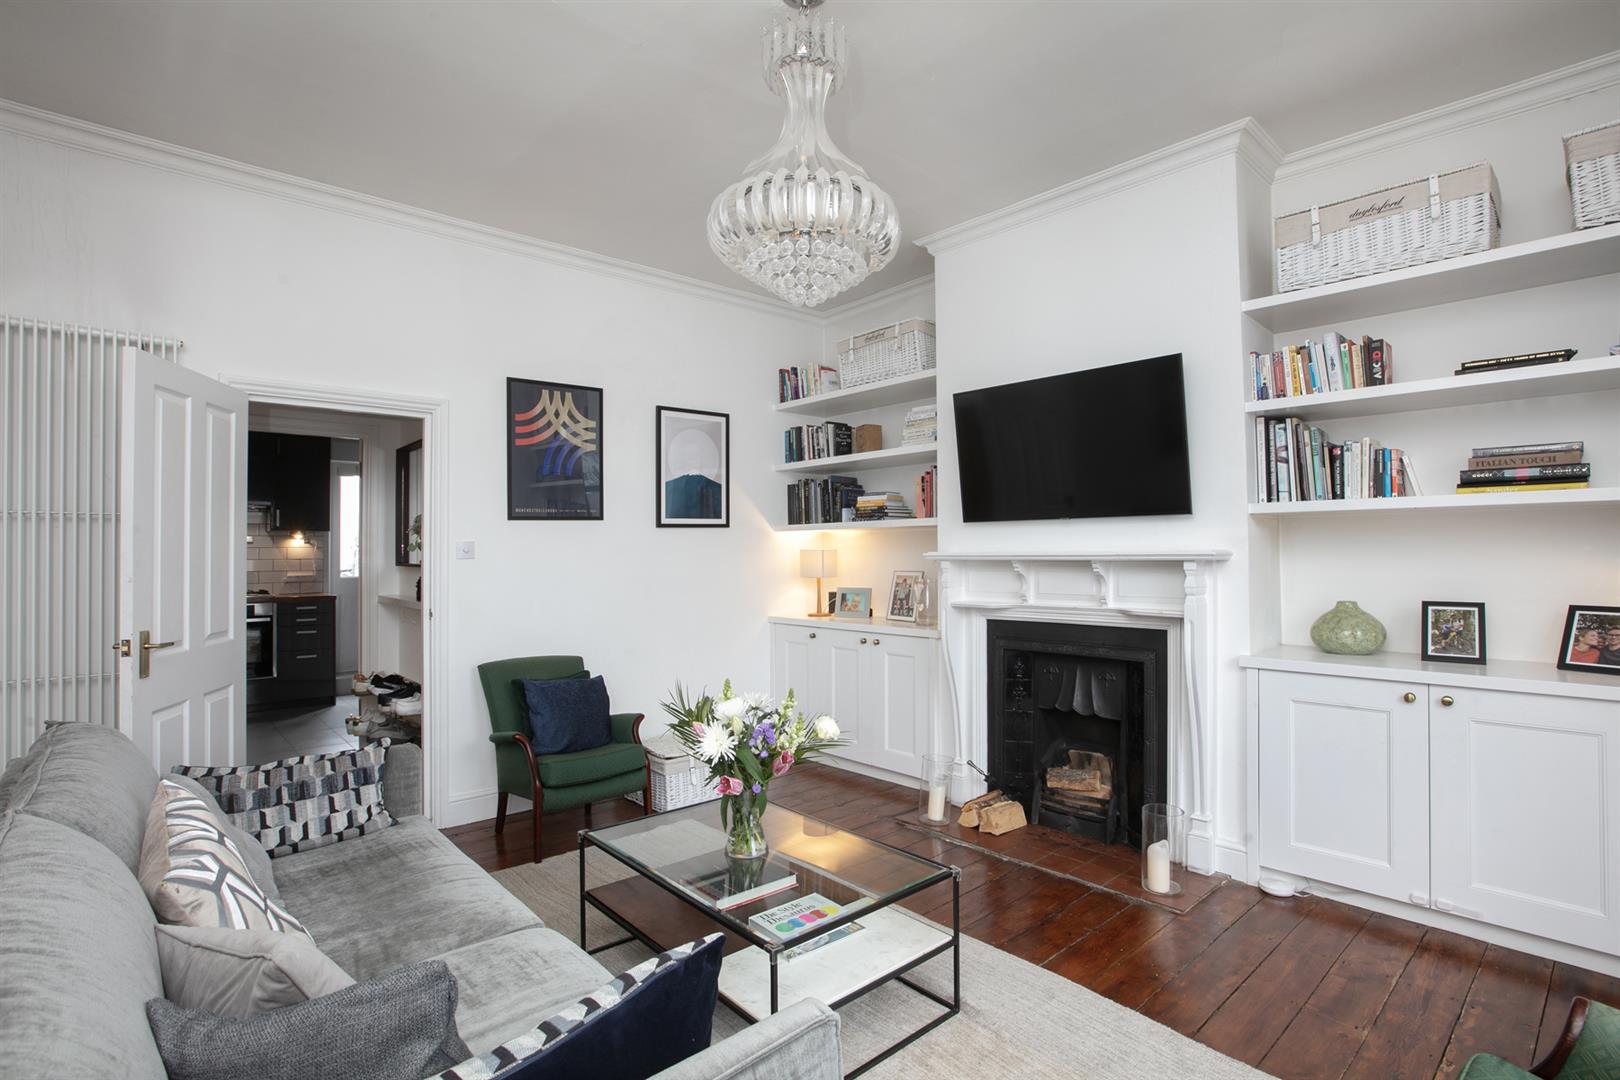 Flat - Conversion For Sale in Consort Road, Nunhead, SE15 1183 view7